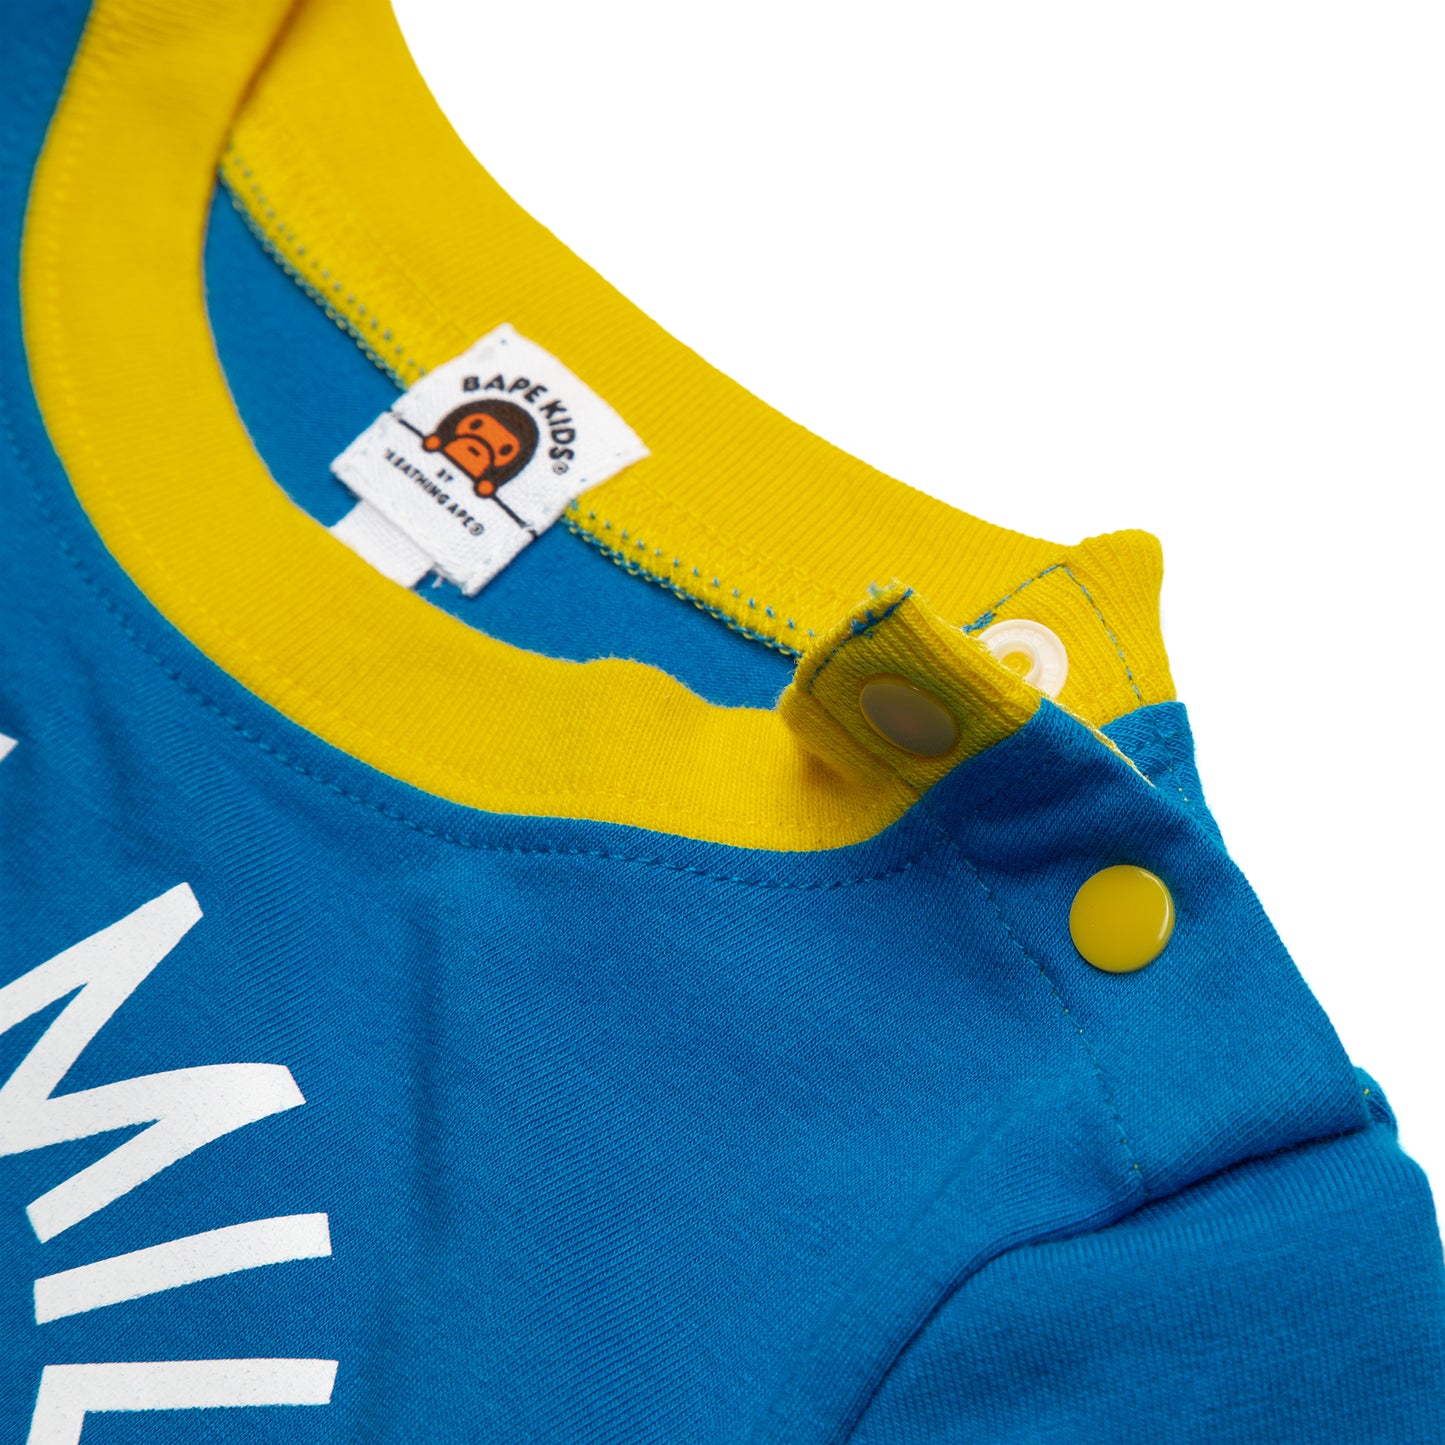 A Bathing Ape kids Baby Milo Stag Beetle Layered Bodysuit (Blue)